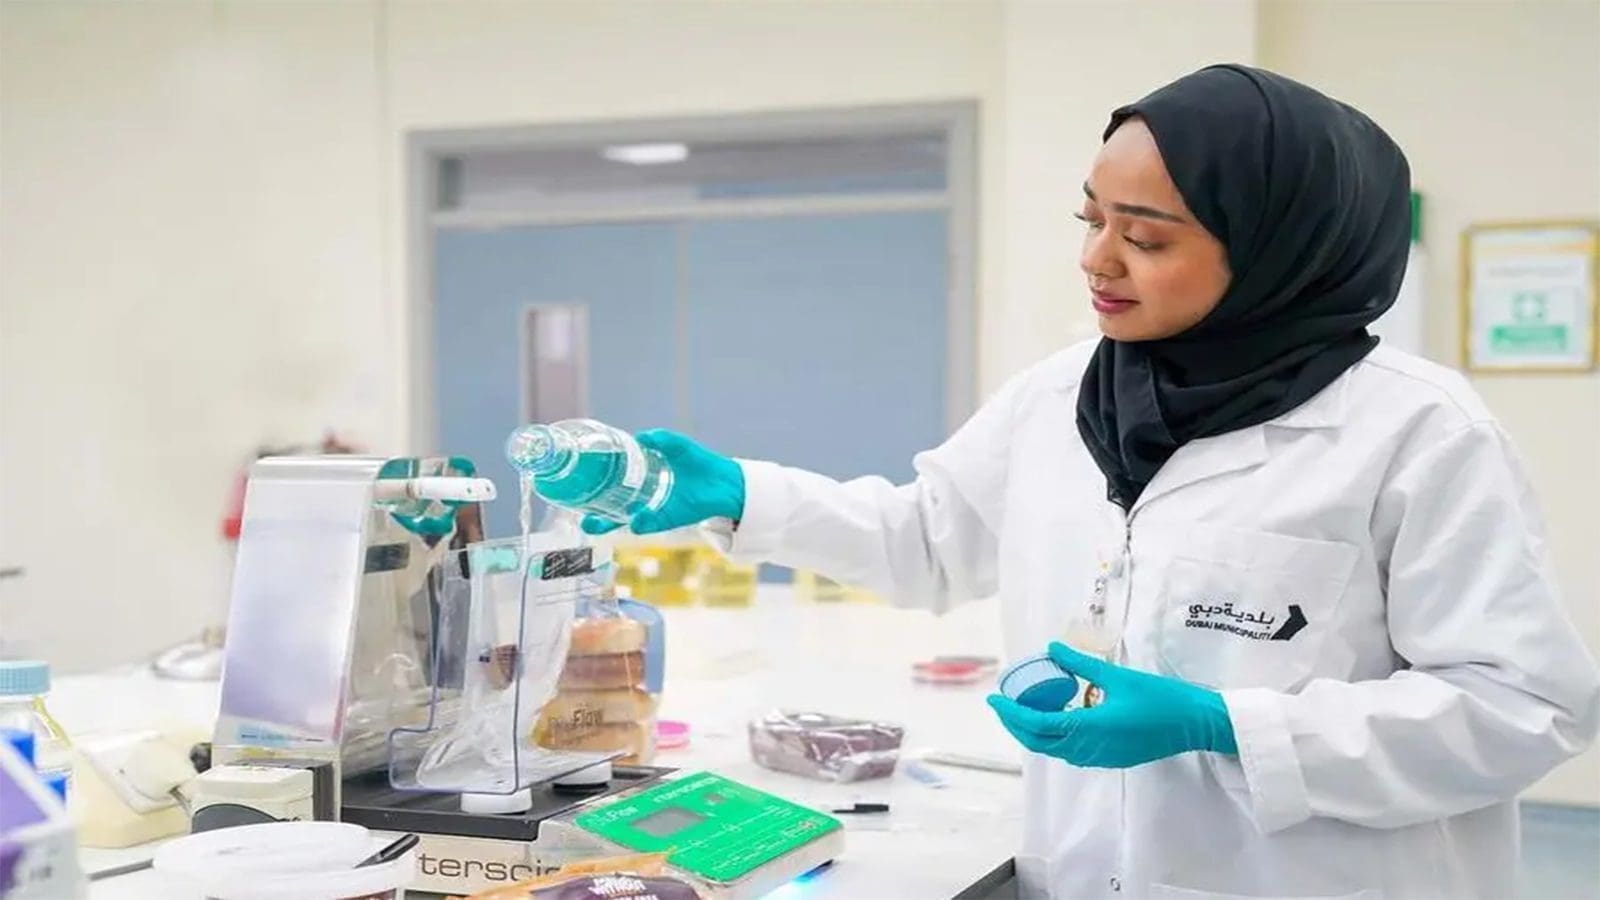 Dubai Central Laboratory accredited as reference laboratory for food product authenticity testing